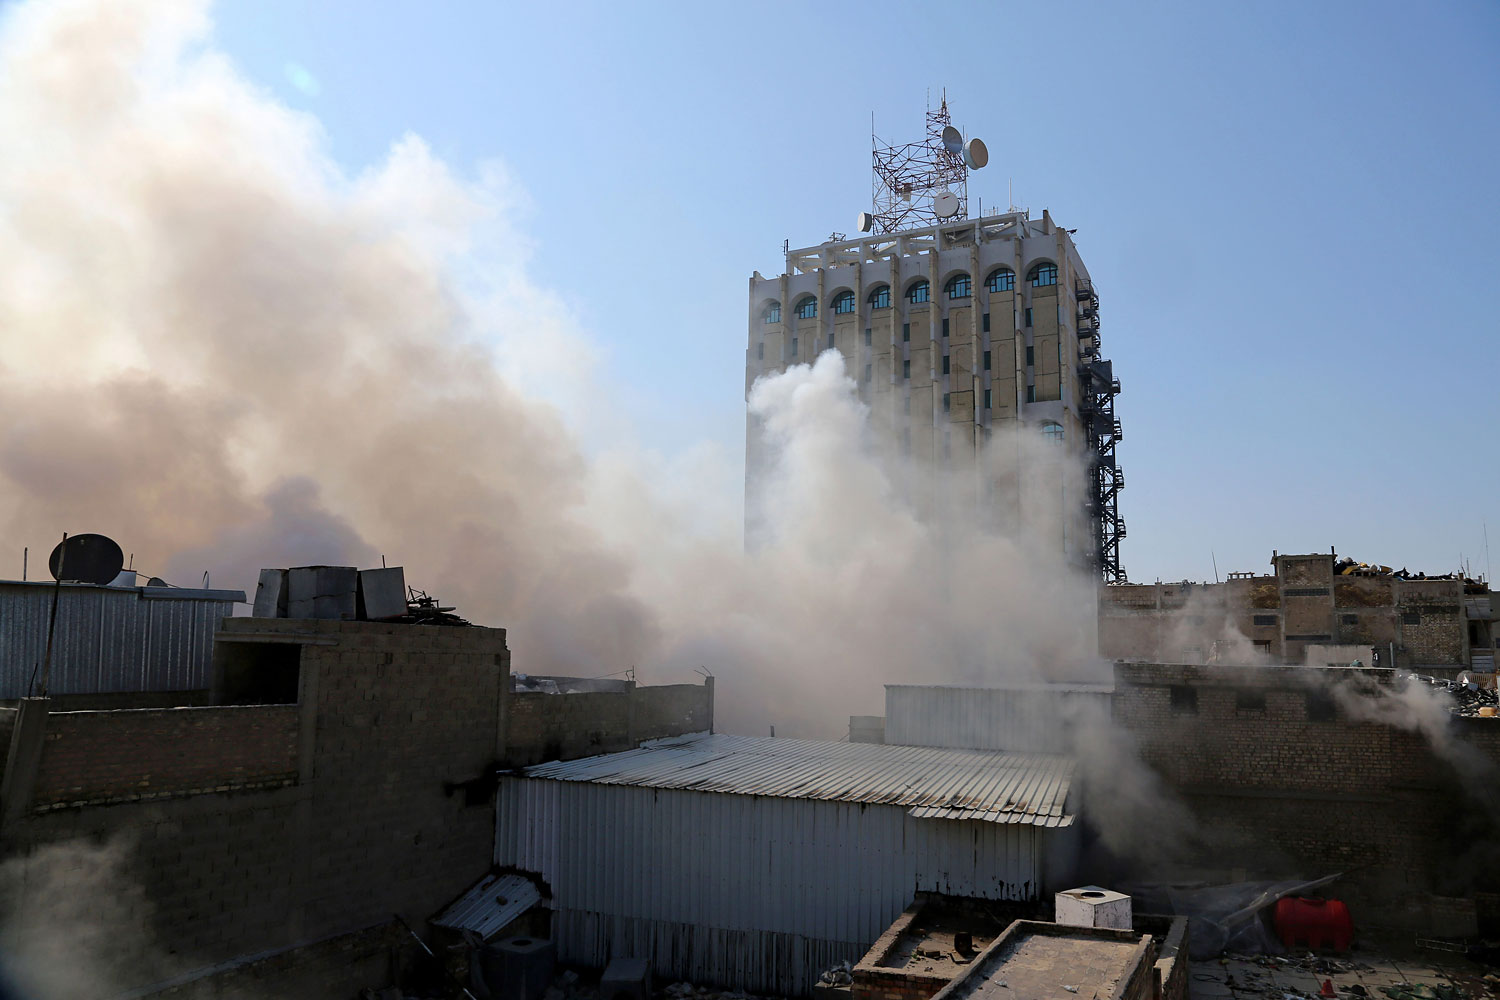 Smoke rises after a parked car bomb went off at a commercial center in Khilani Square in central Baghdad, Feb. 5, 2014.